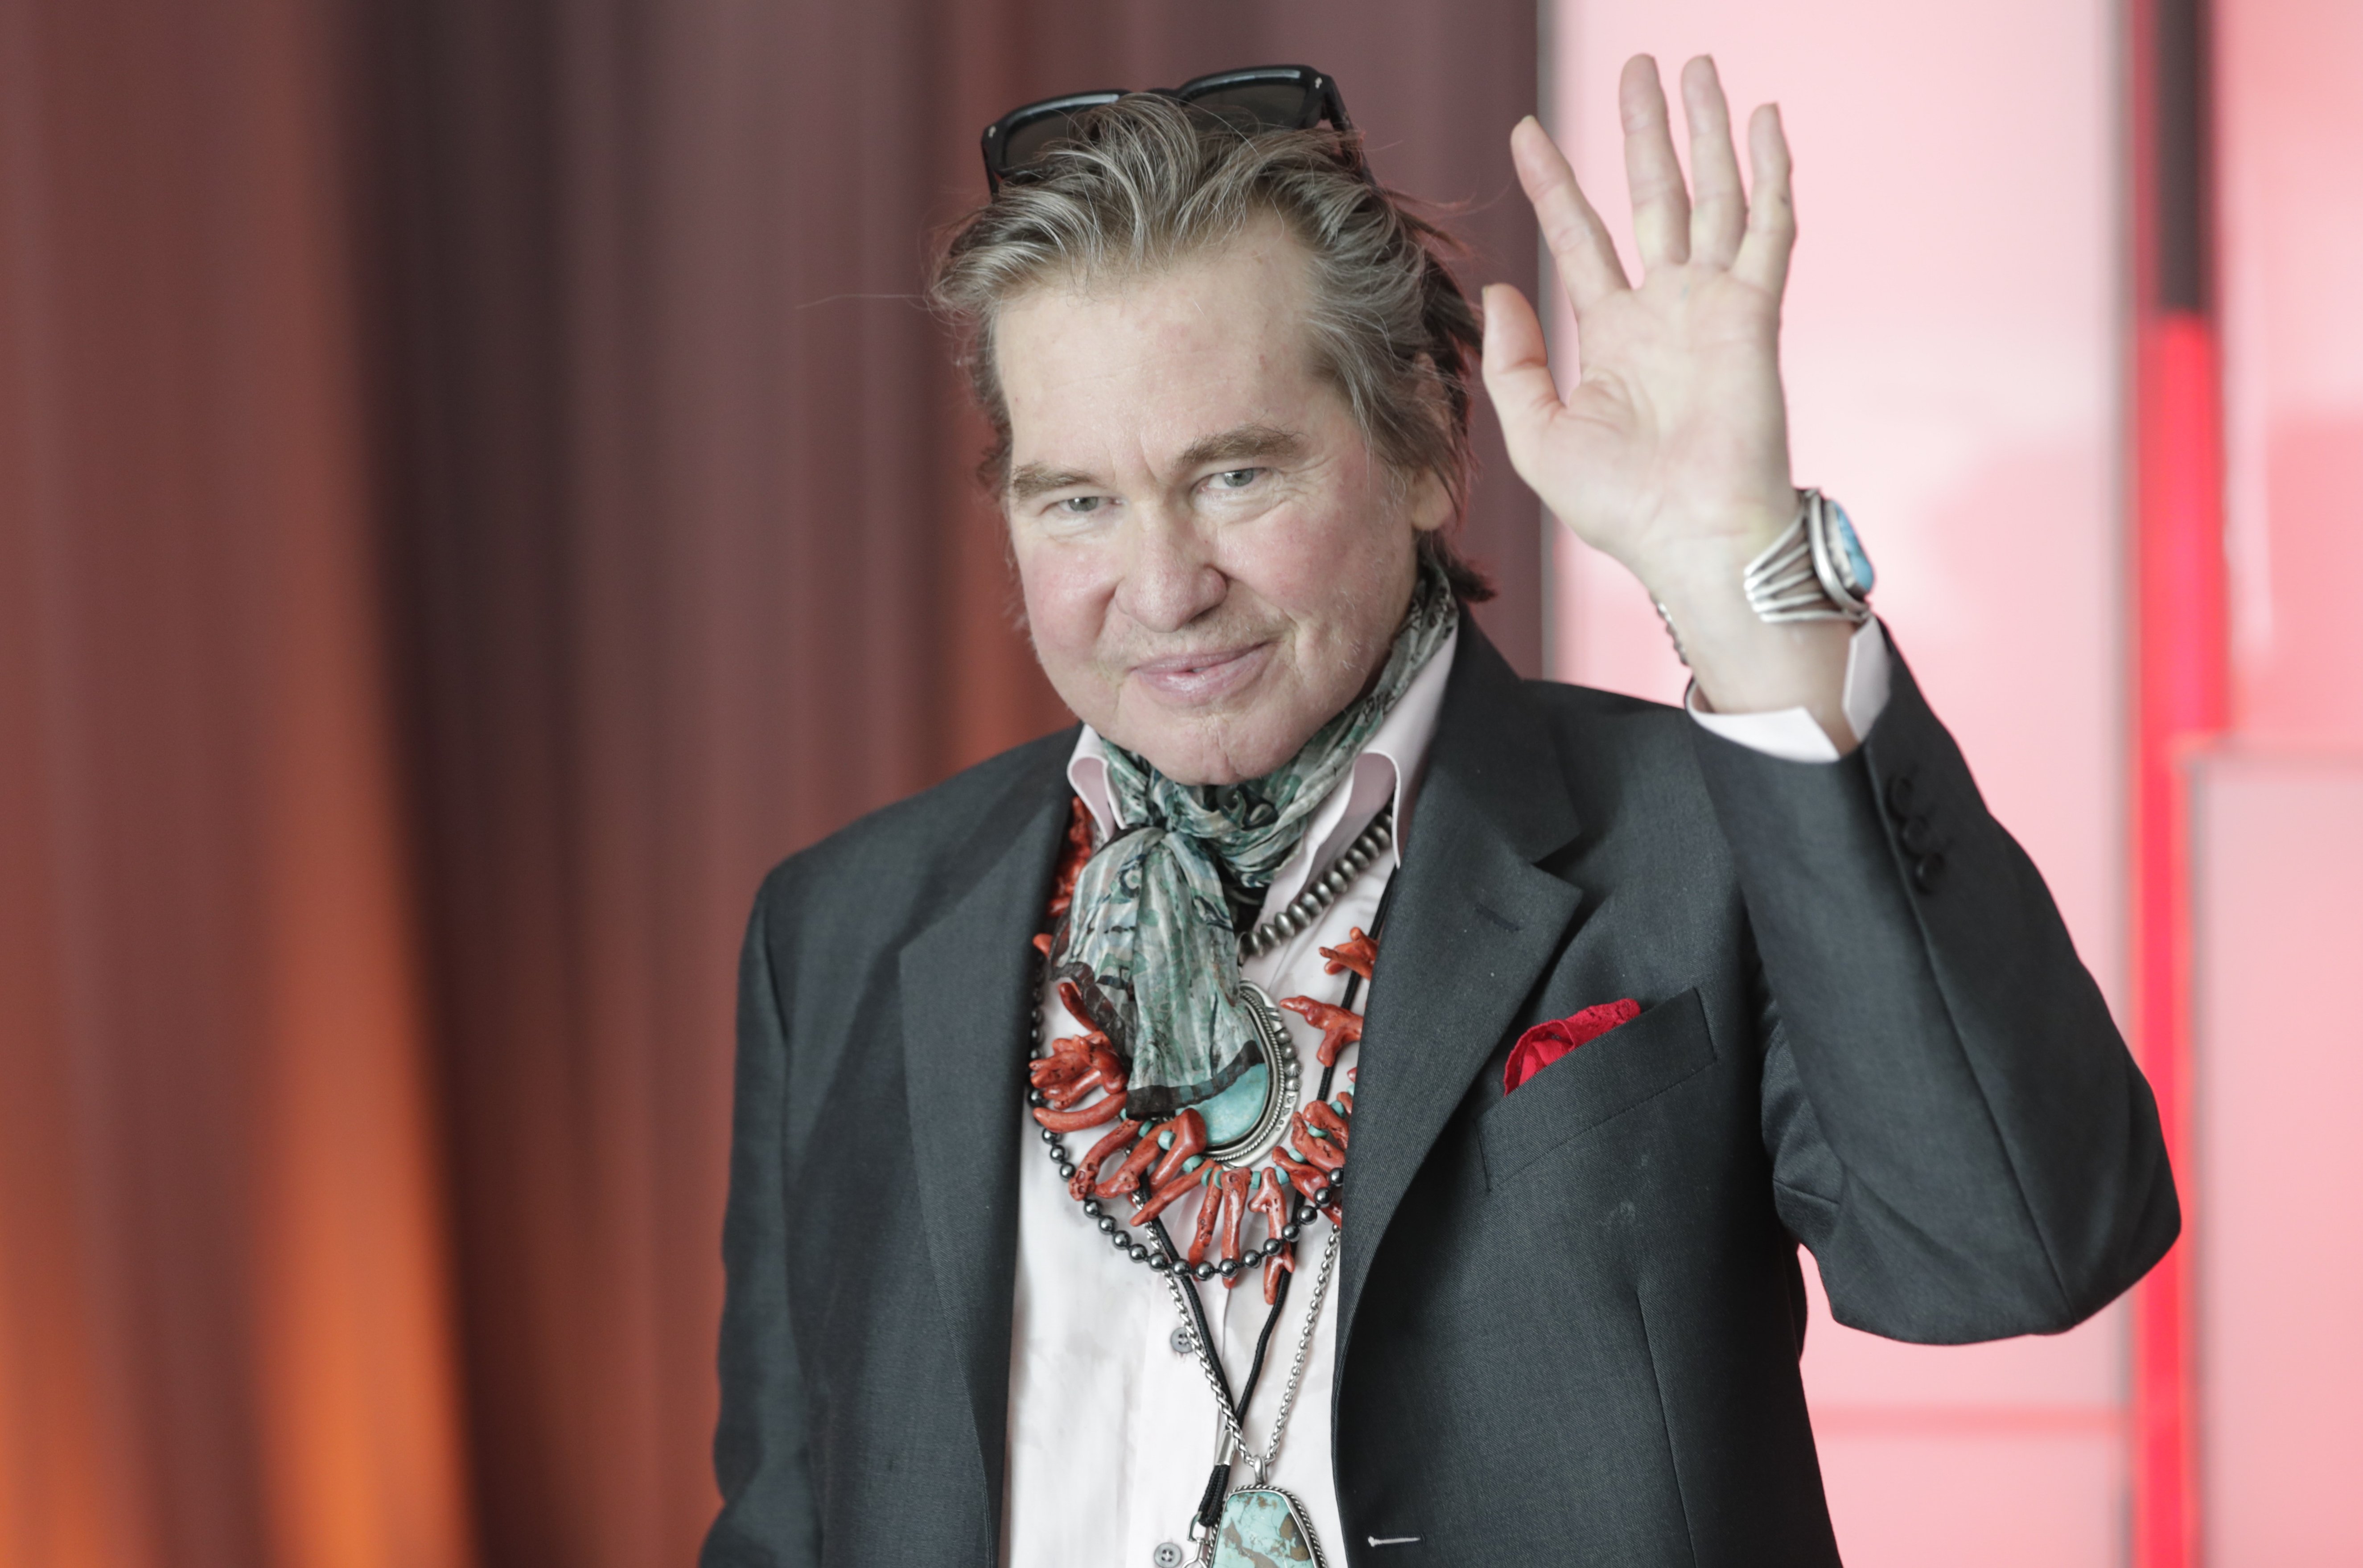 Val Kilmer at the United Nations headquarters on July 20, 2019 | Source: Getty Images